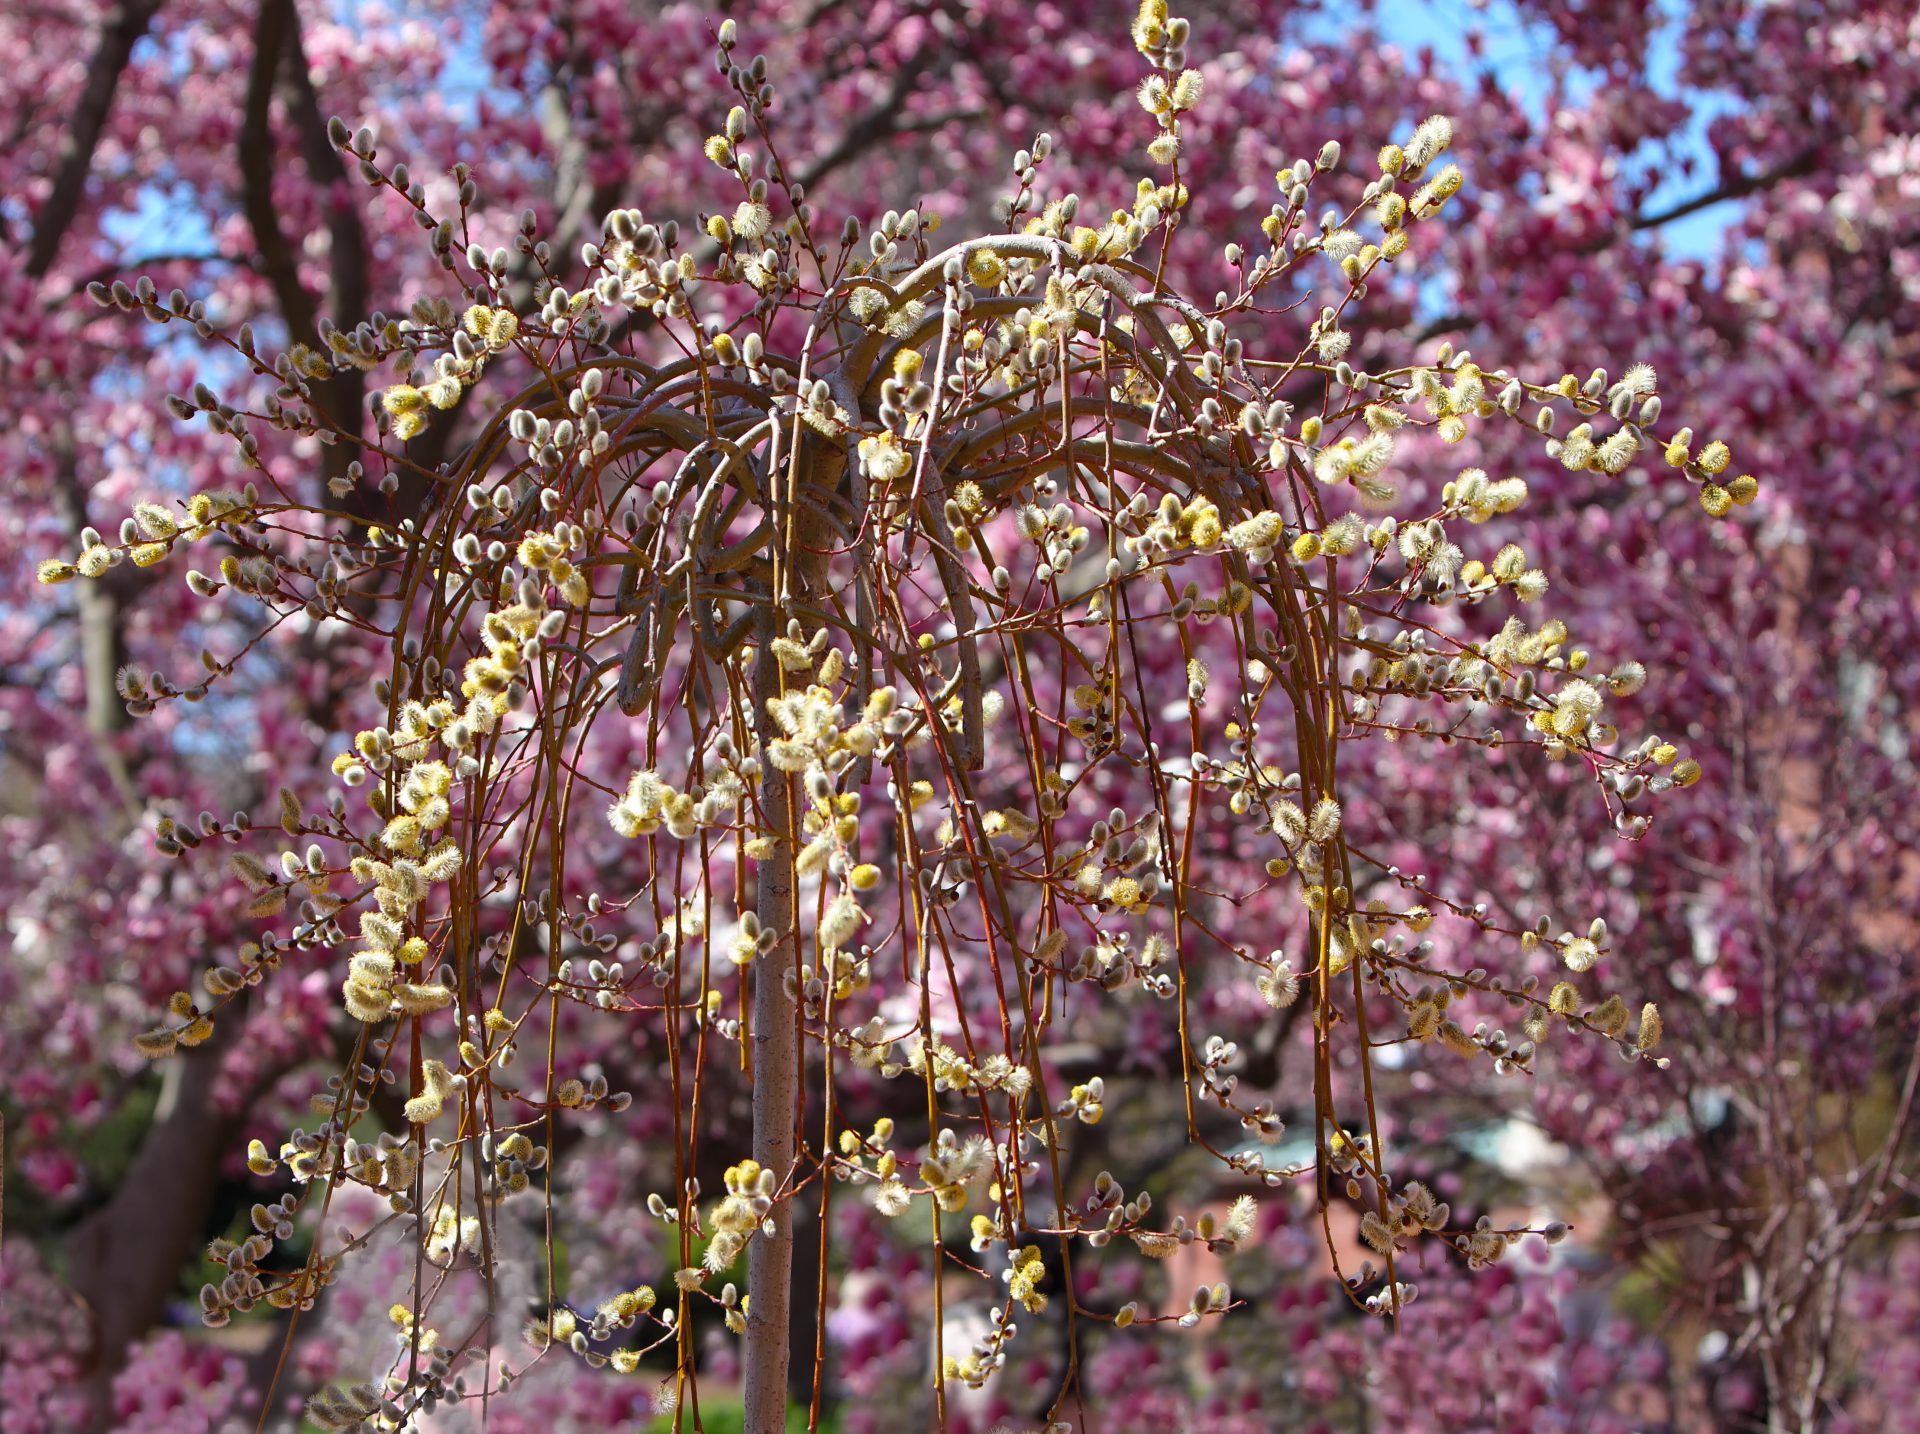 Yellow Weeping pussy willow over purple magnolia blooming background